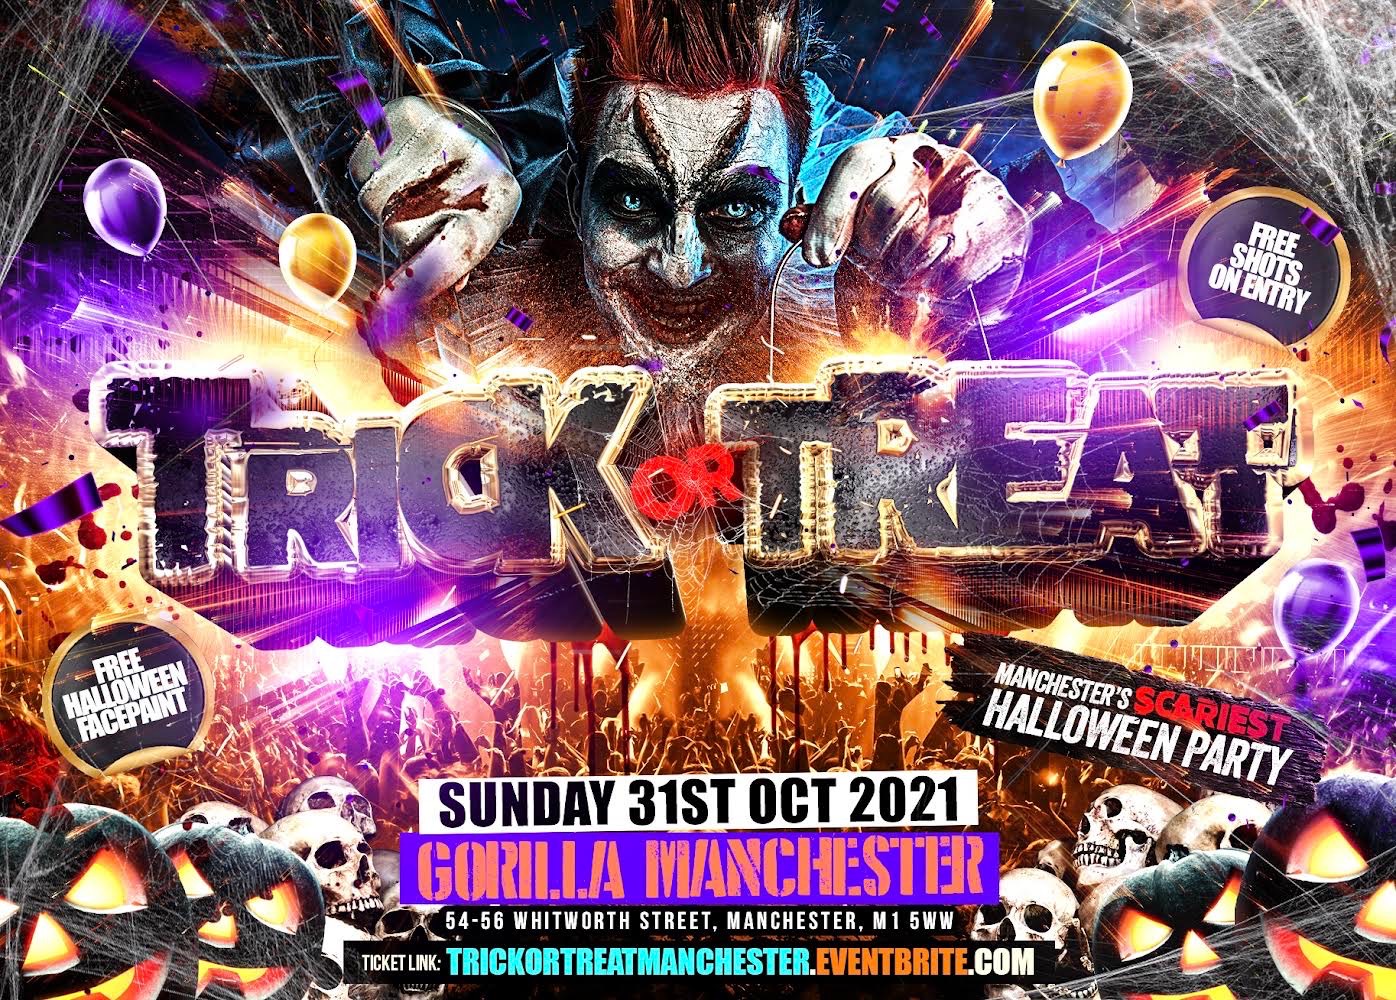 Trick or Treat at Gorilla, Manchester on 31st Oct 2021 Fatsoma